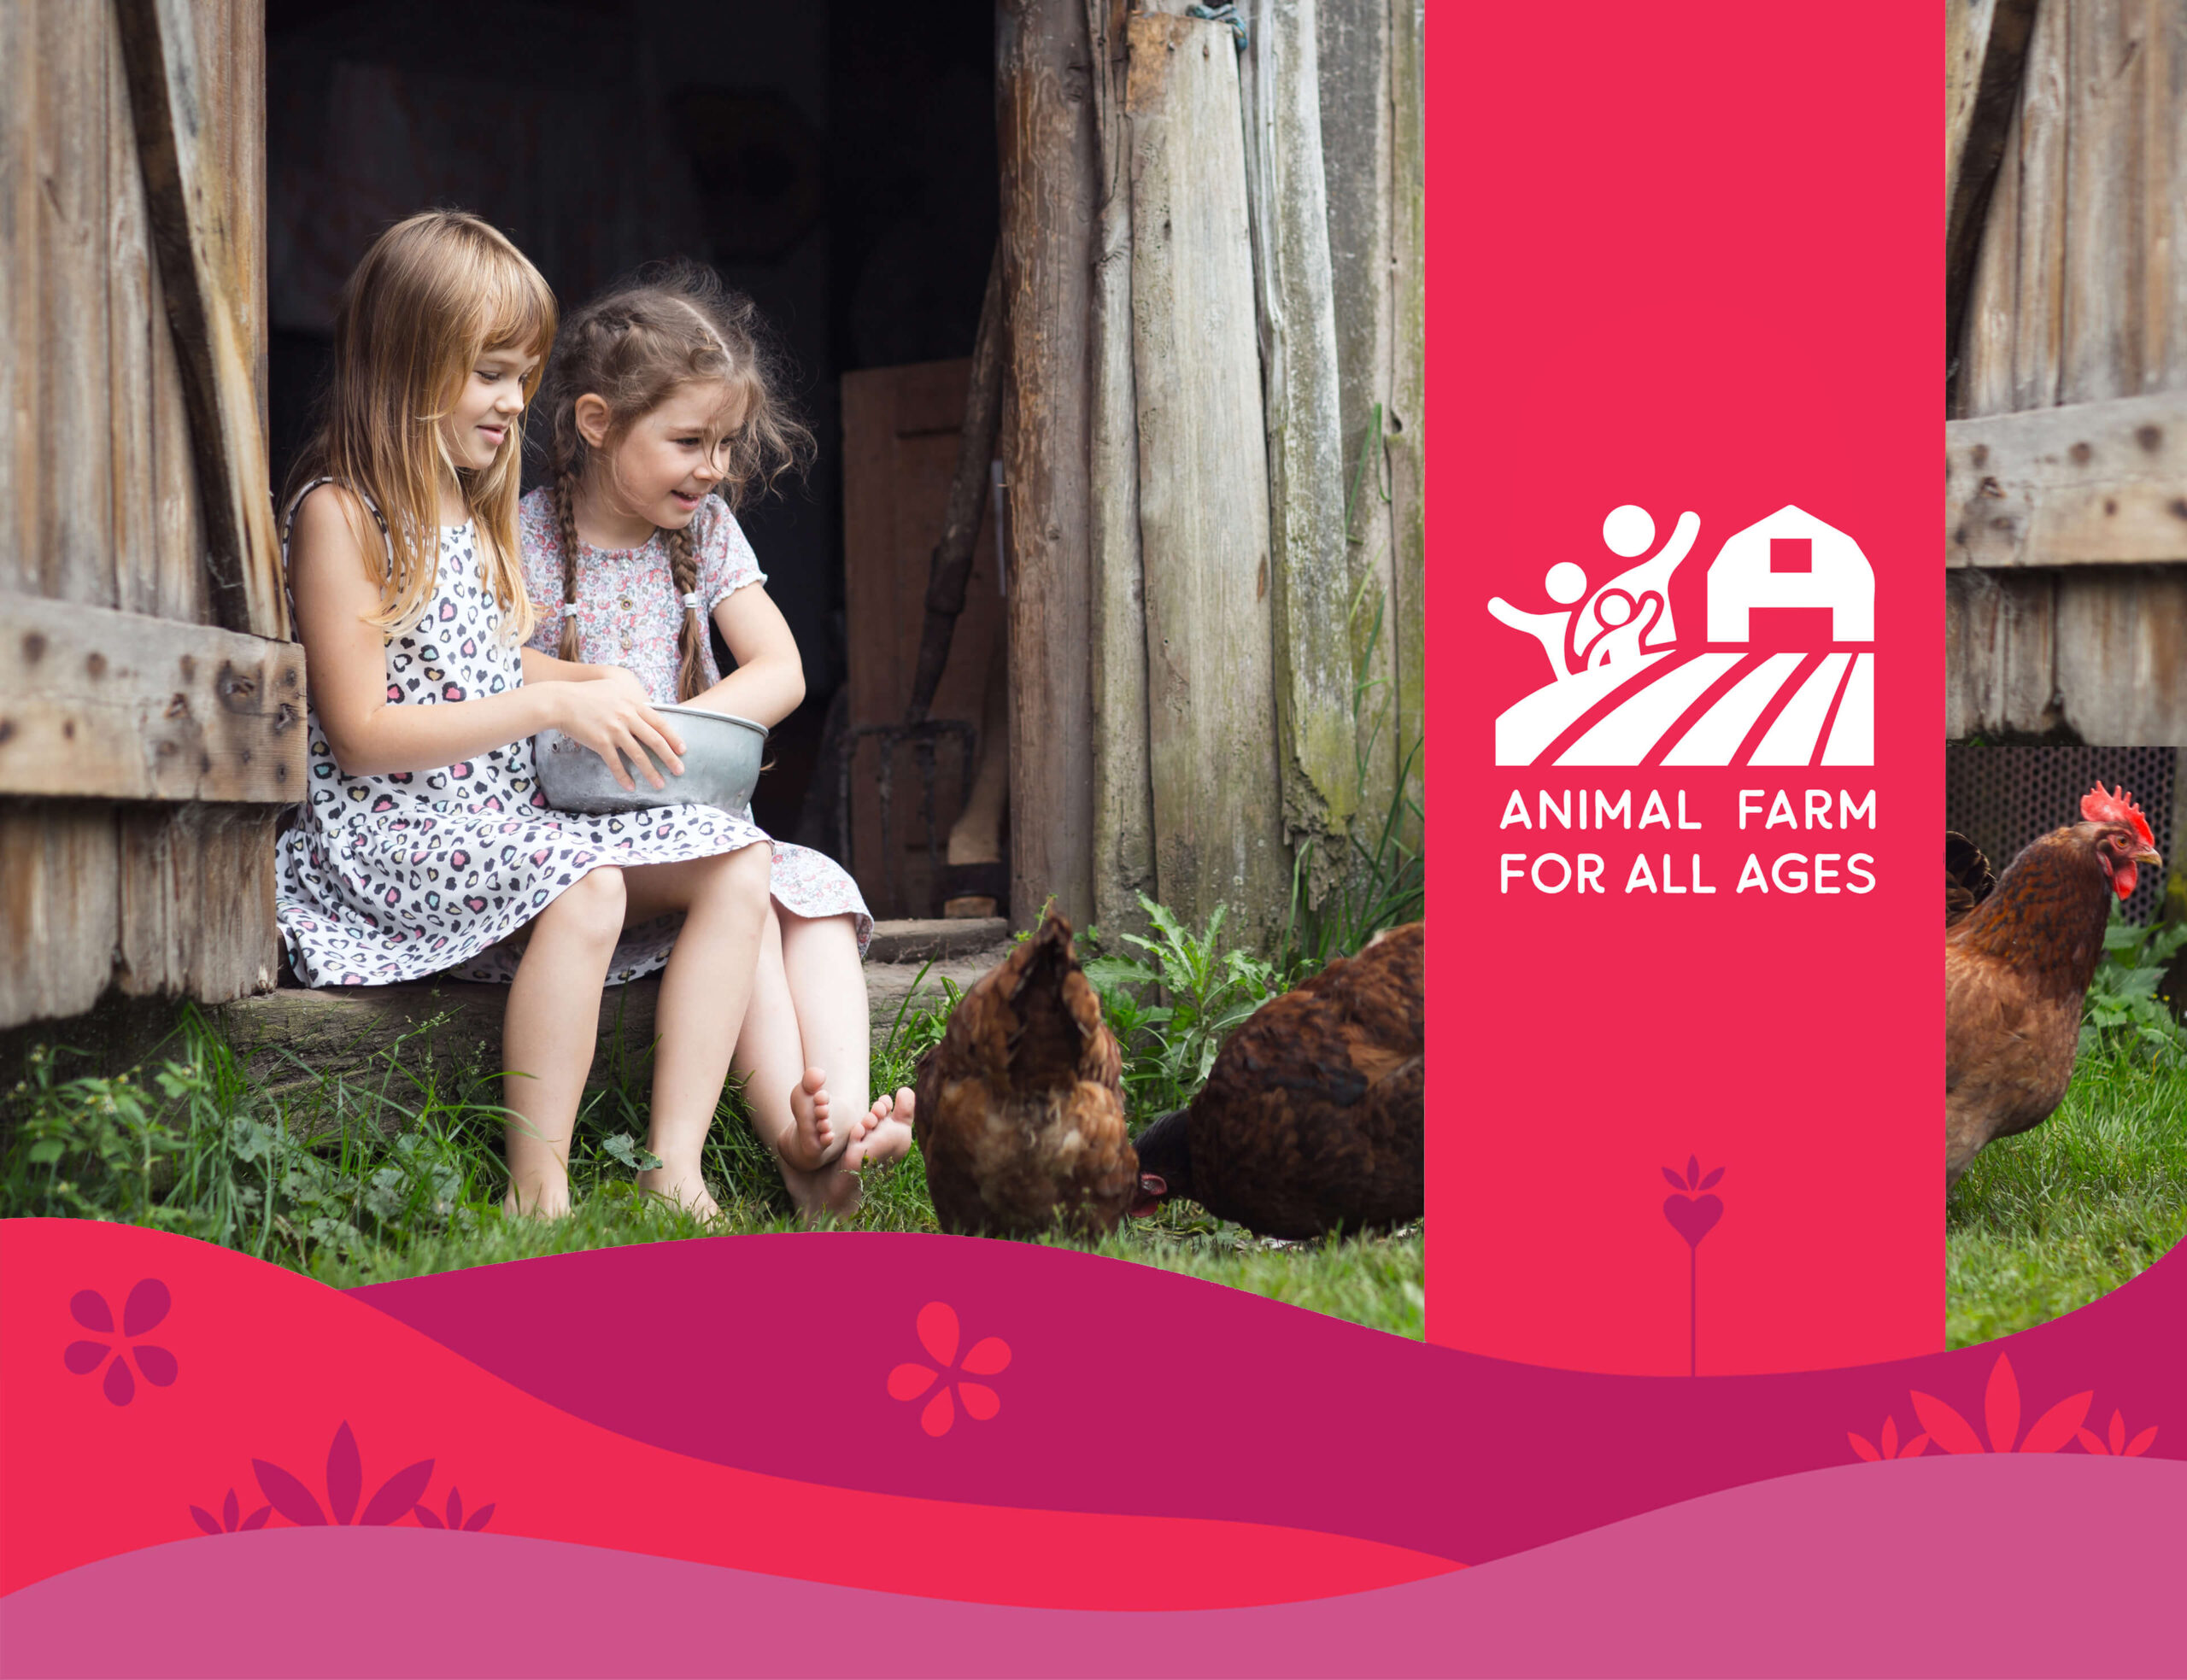 Our animal farm in Mallorca- a real paradise for children